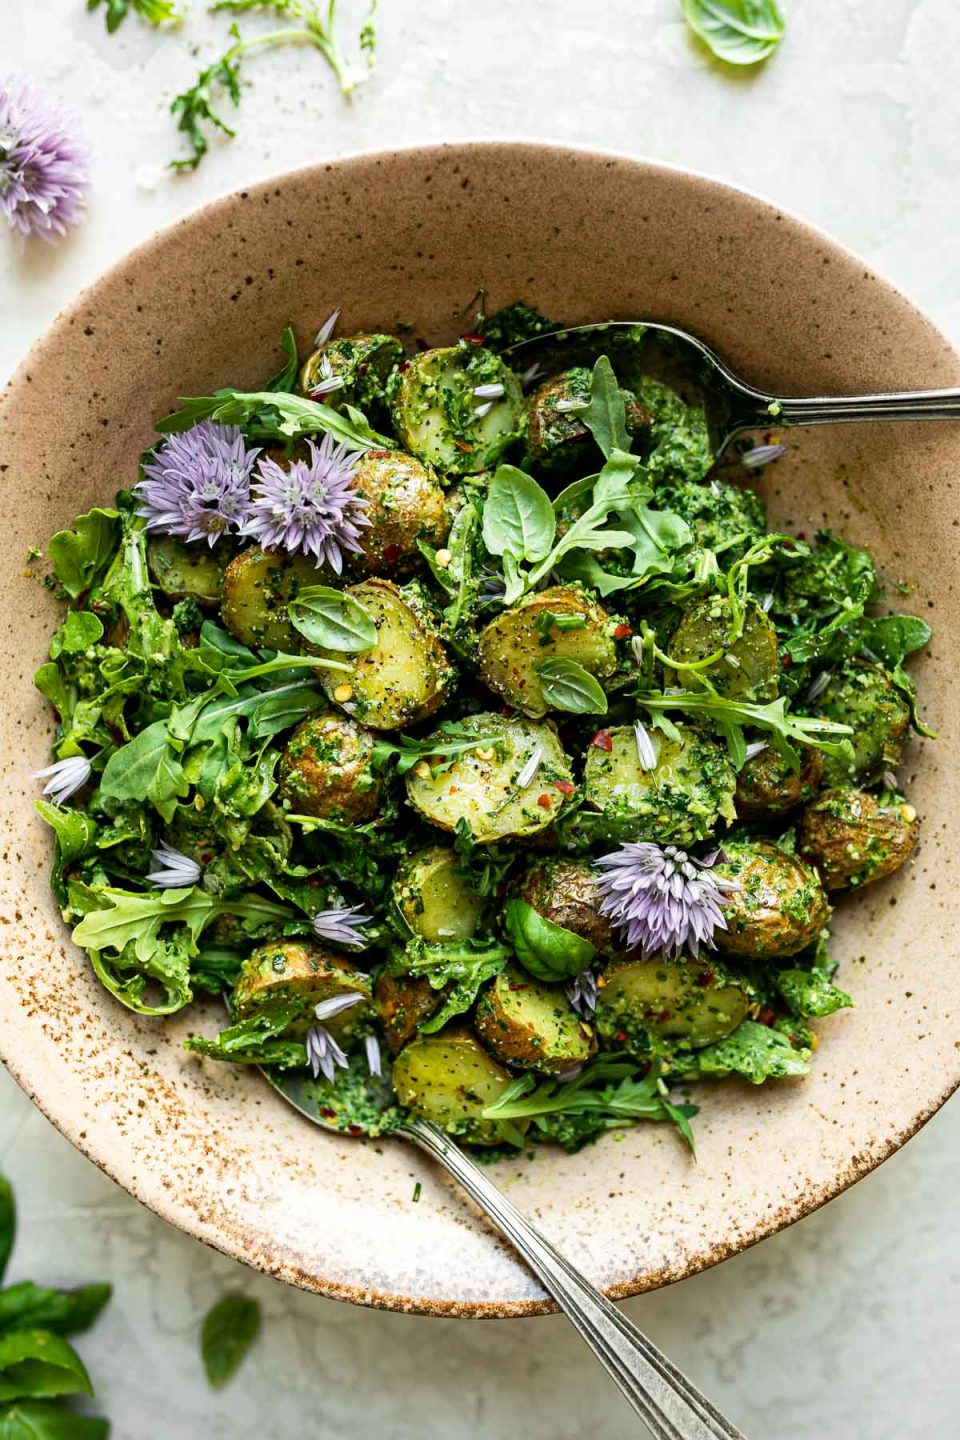 Green goddess pesto potato salad in ceramic serving bowl atop a white surface. The potato salad is tossed & topped with purple chive blossoms & has serving spoons nestled in it. The bowl is surrounded by fresh herbs, loose arugula leaves, & chive blossoms.